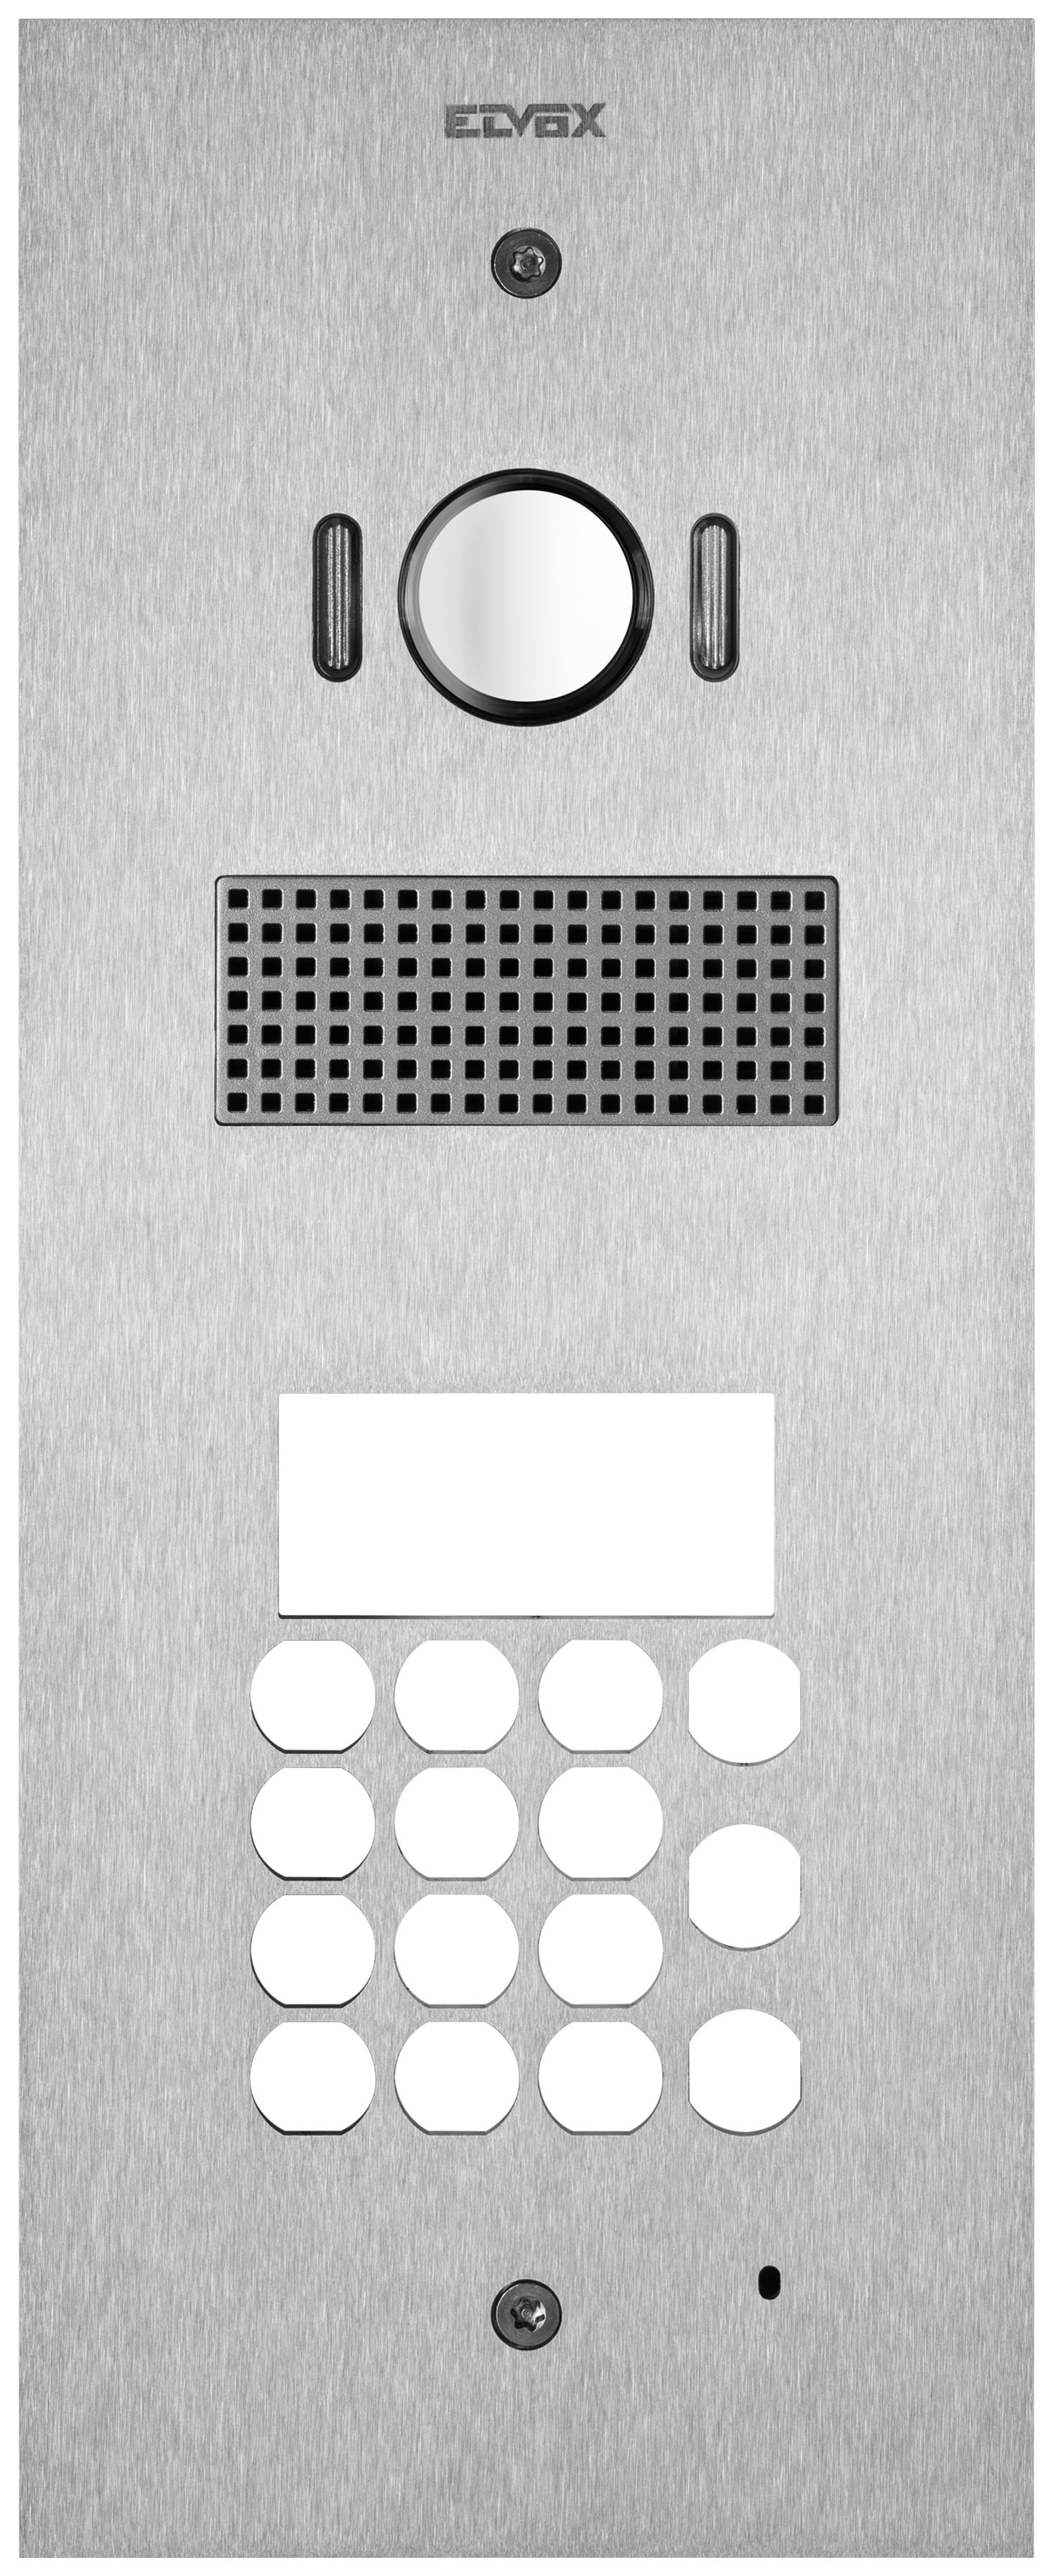 ELVOX STEELY SERIES AUDIO VIDEO COVER PLATE WITH KEYPAD CUTOUT STAINLESS STEEL SURF/ FLUSH MOUNTED IP54 IK07 *REQURED MOUNTING BOX* SUITS 13A7.B